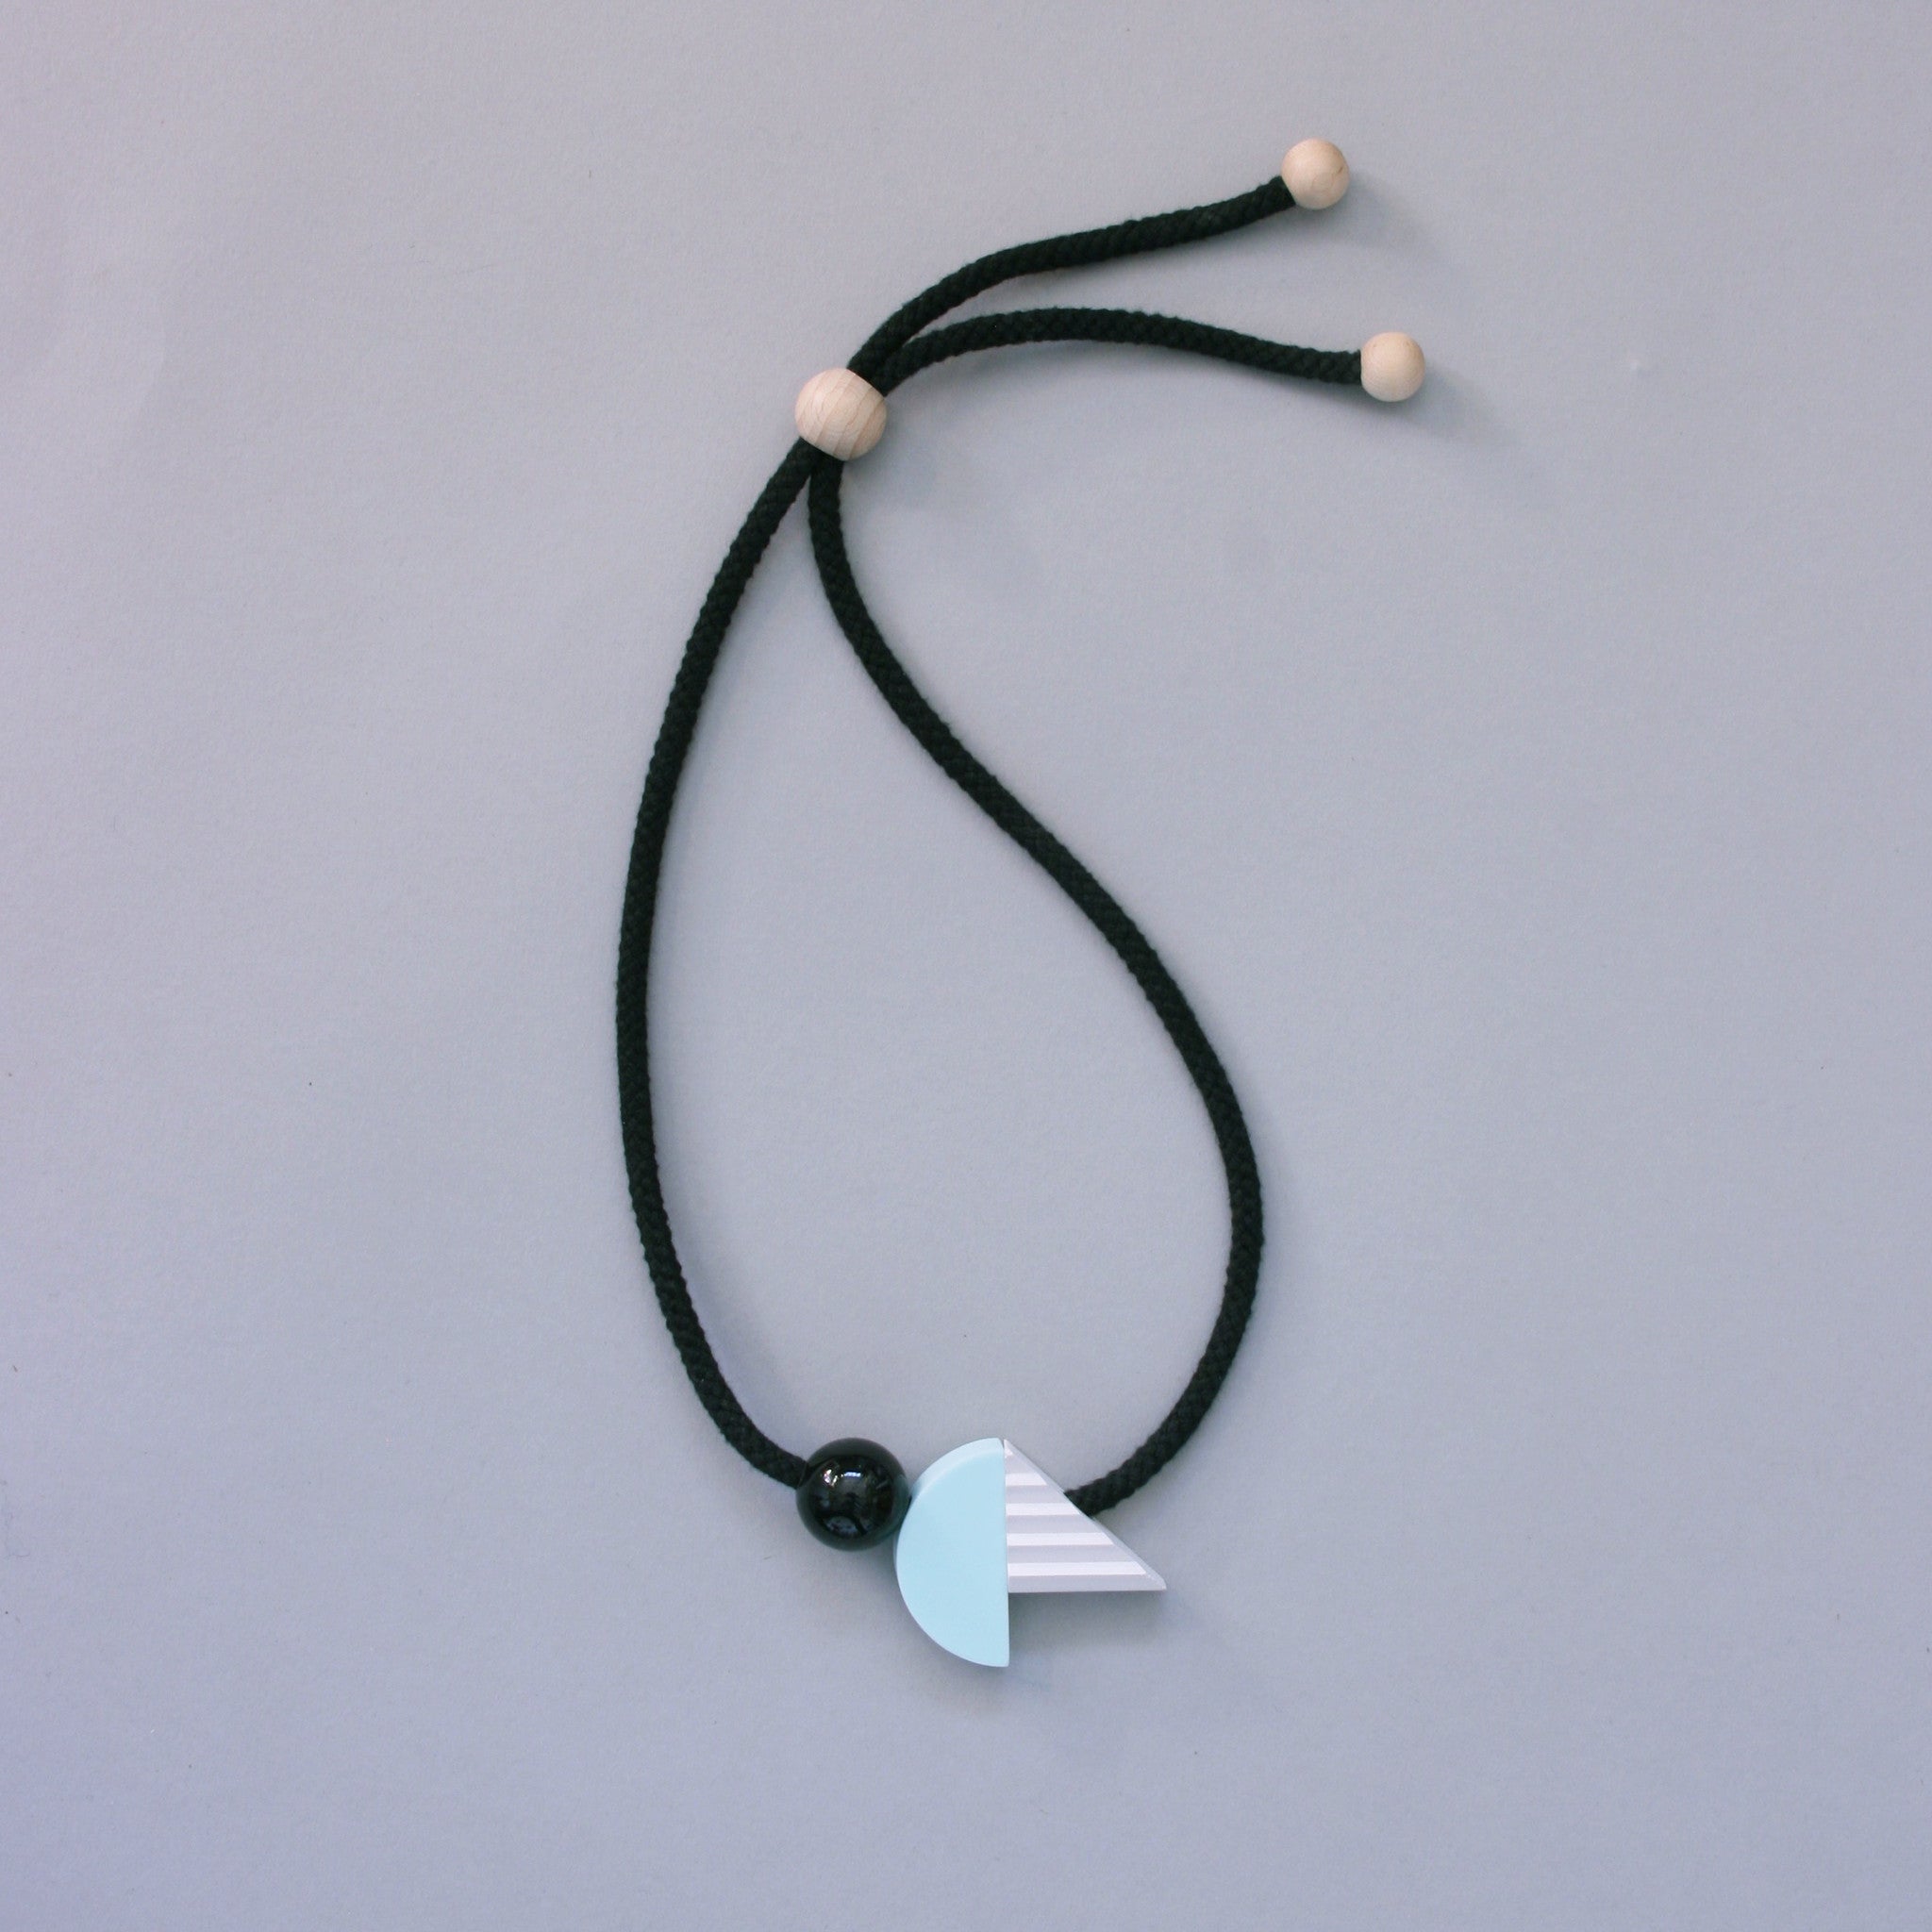 Striking geometric necklace composed of a mint resin curve and a hand cast ridged concrete-look resin triangle. The unusual mix of materials creates an intriguing necklace of varying textures and shapes.